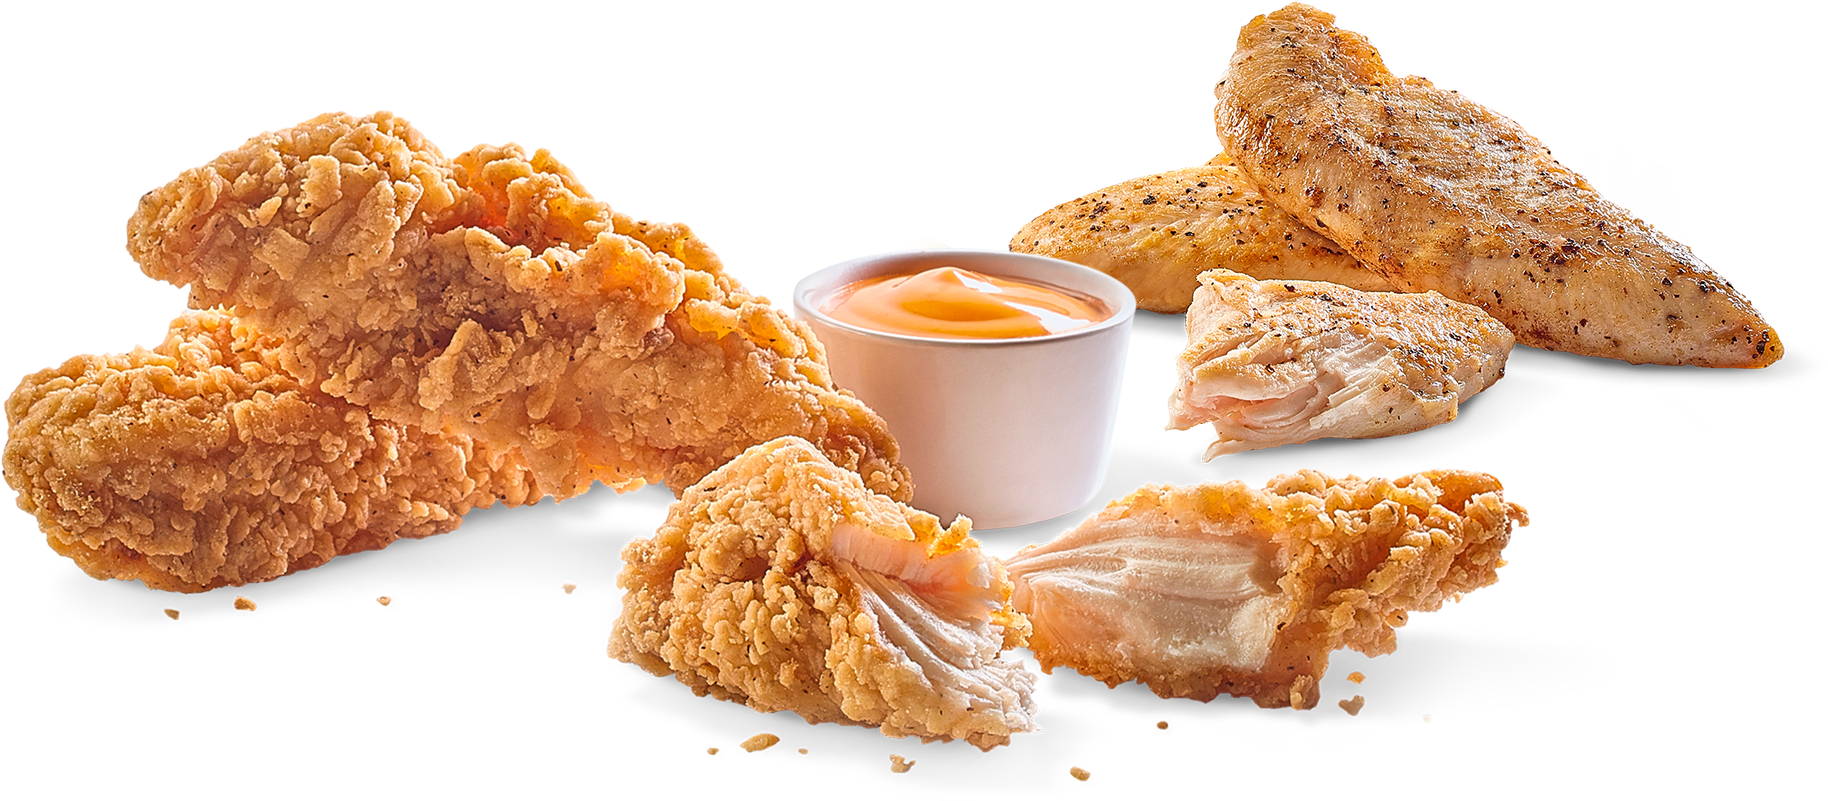 A Group Of Fried Chicken Pieces And A Cup Of Sauce